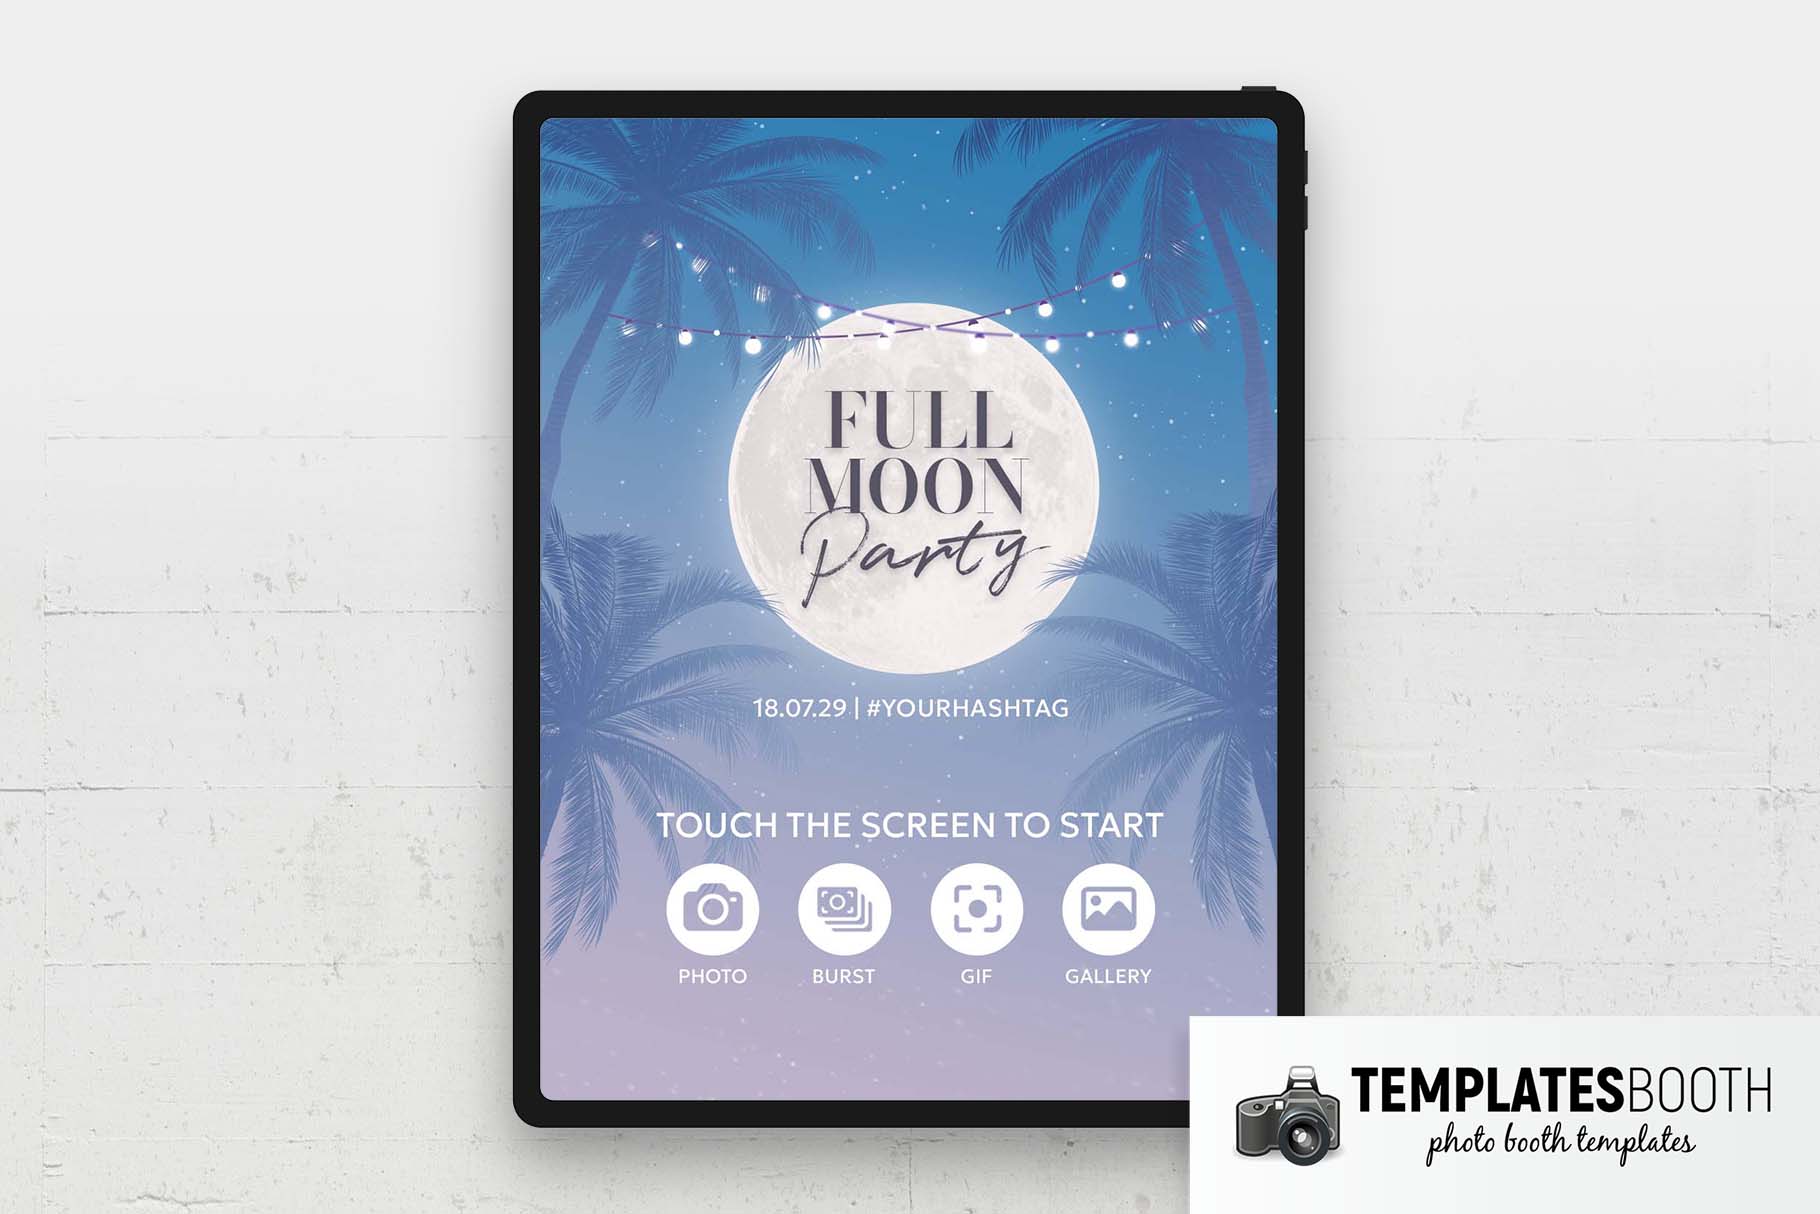 Full Moon Party Photo Booth Welcome Screen